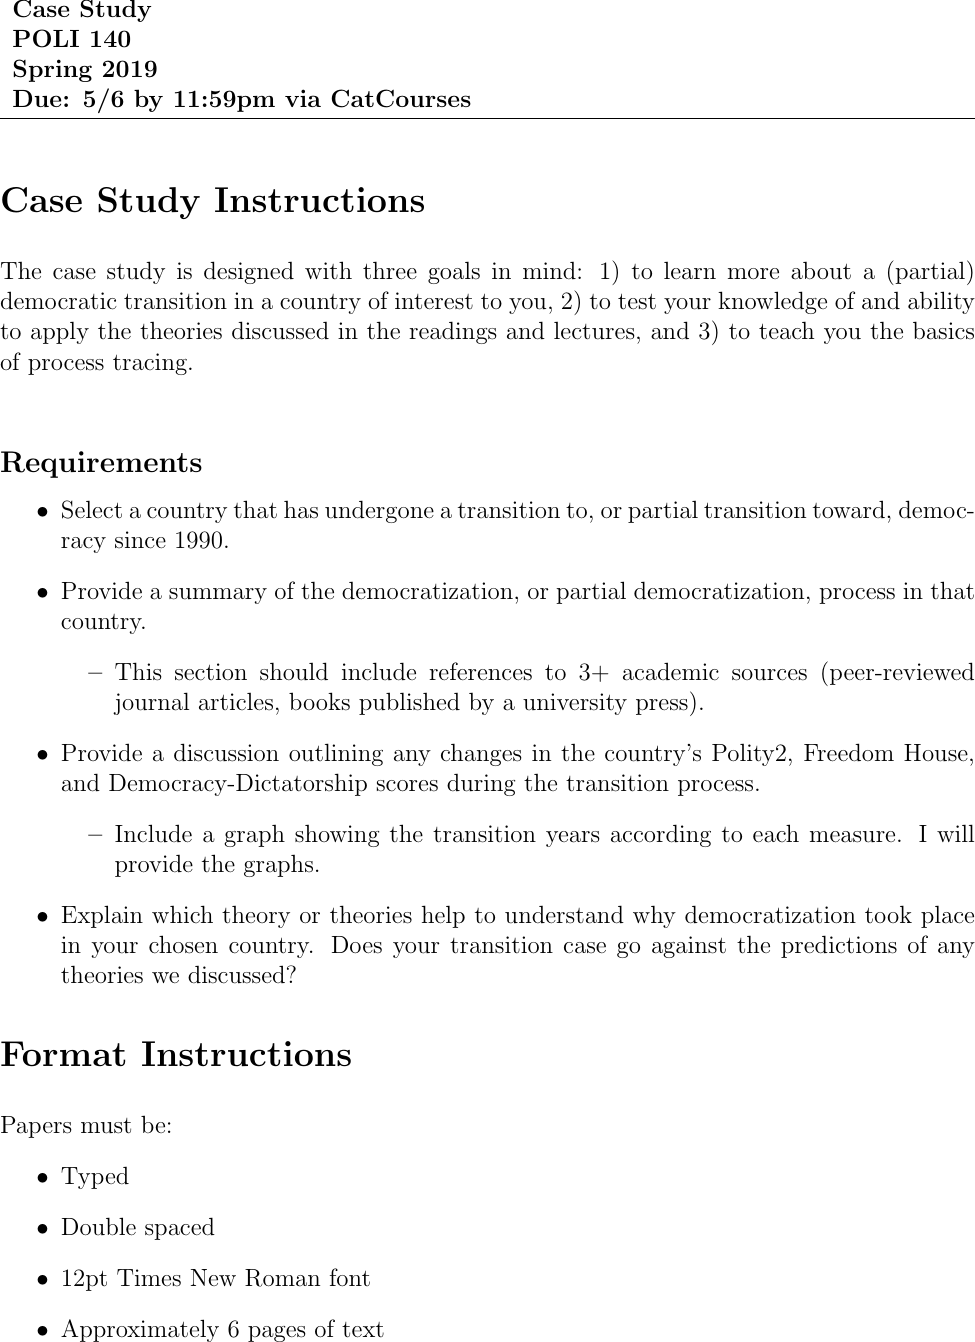 case study assignment instructions